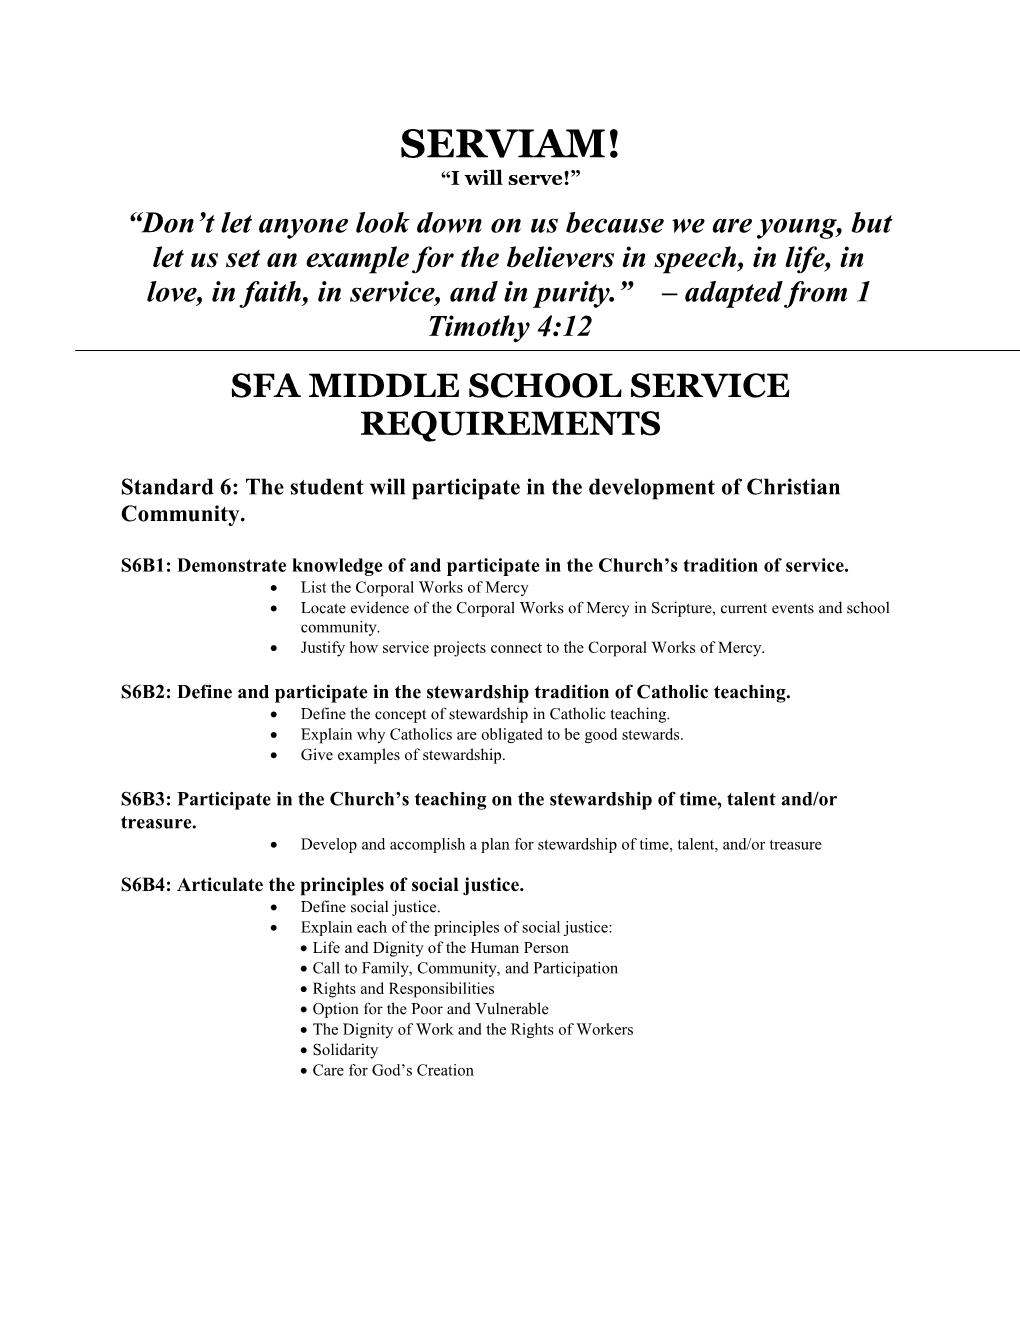 Sfa Middle School Service Requirements